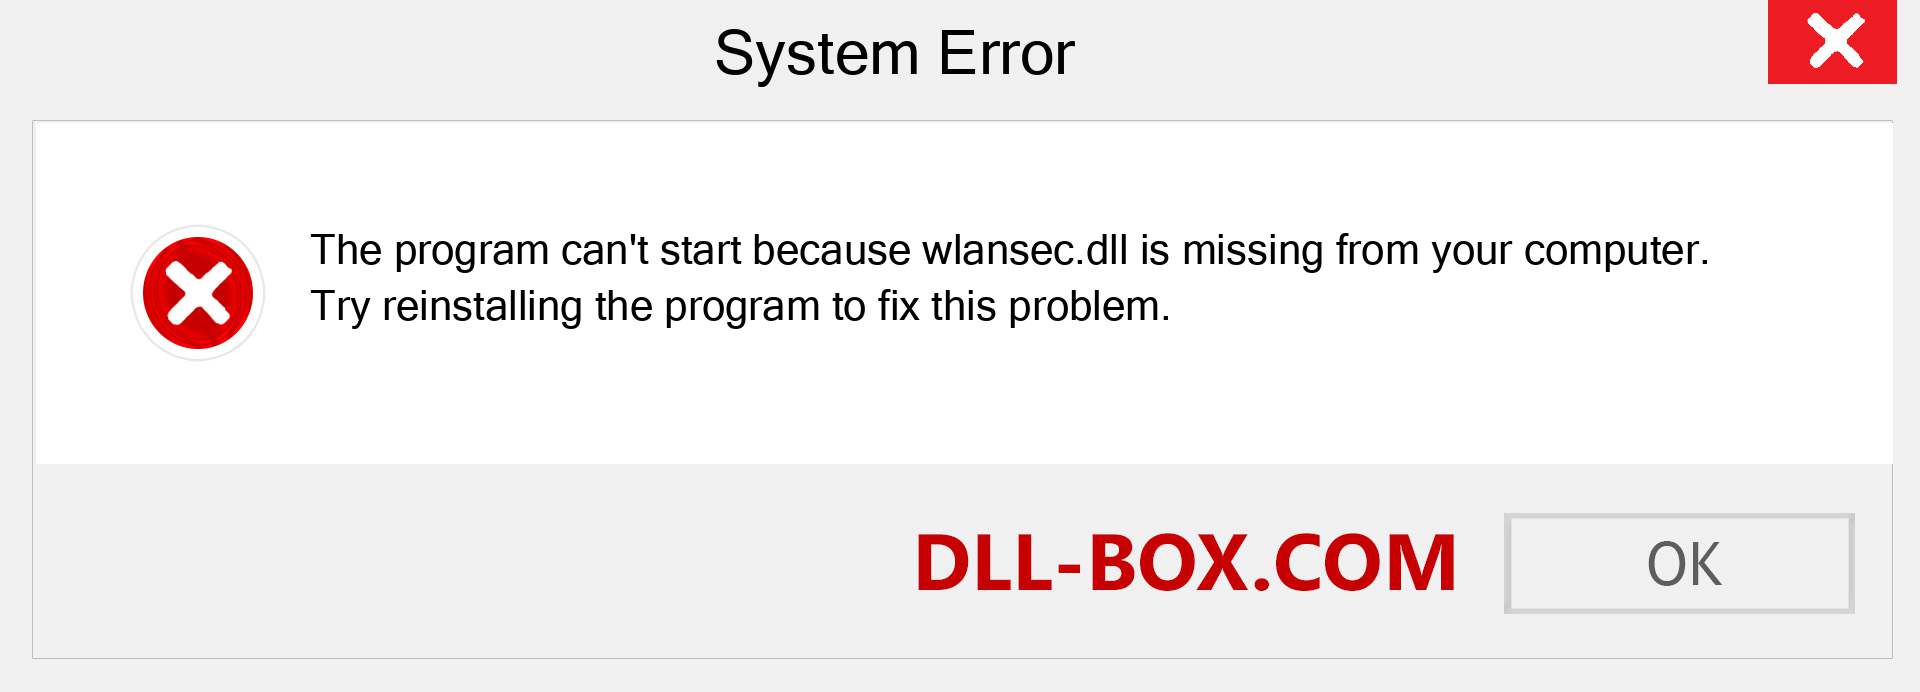  wlansec.dll file is missing?. Download for Windows 7, 8, 10 - Fix  wlansec dll Missing Error on Windows, photos, images